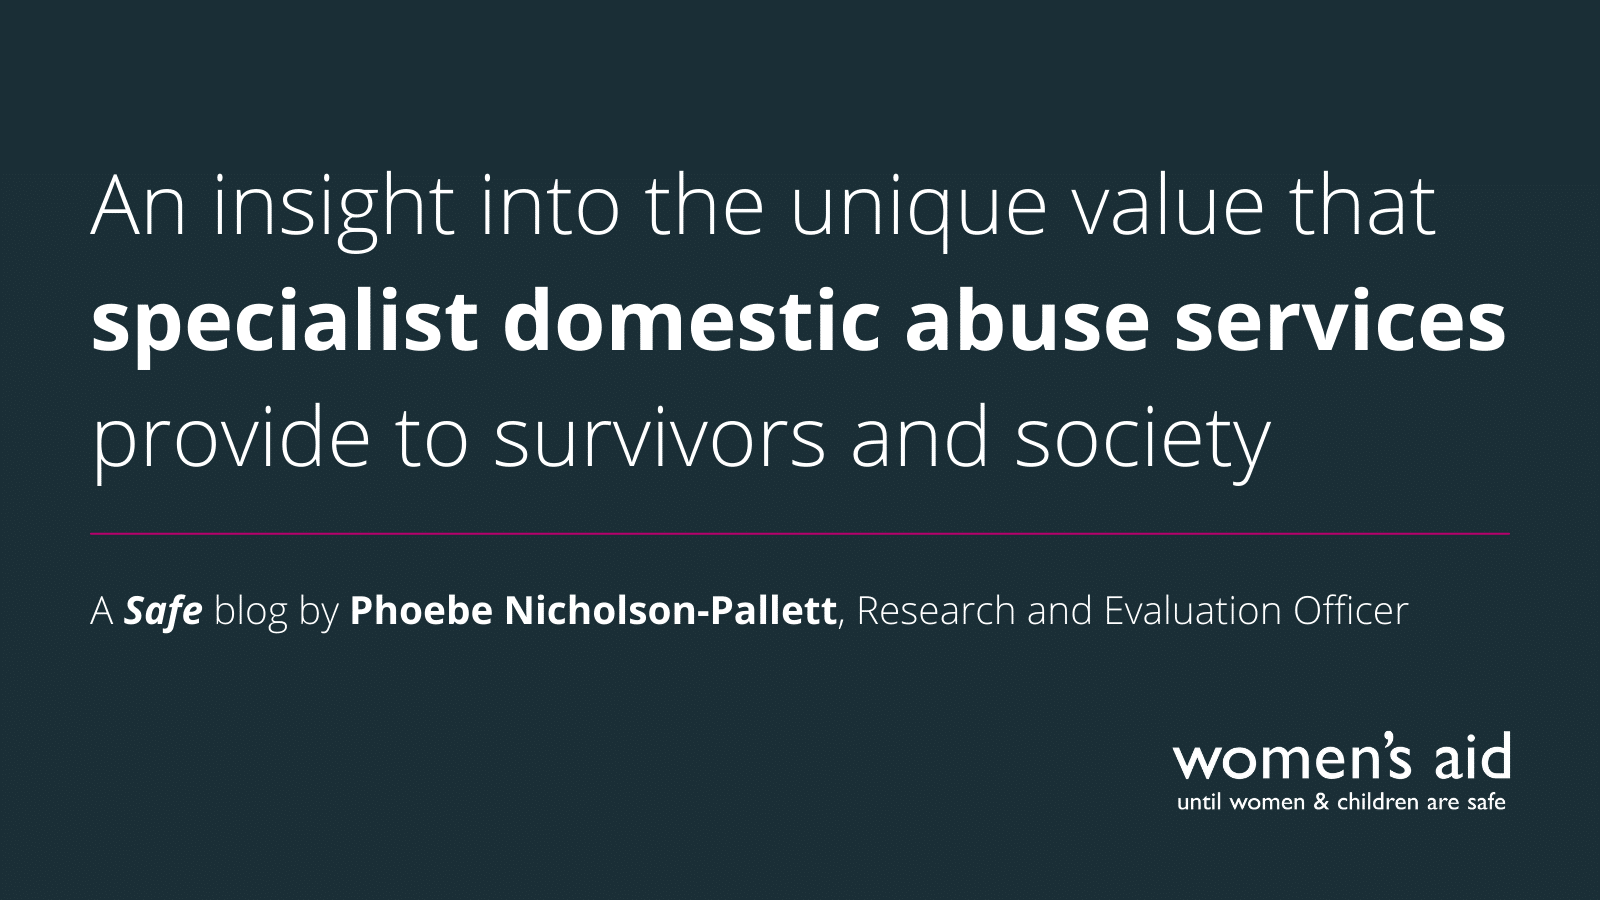 An insight into the unique value that specialist domestic abuse services provide to survivors and society.